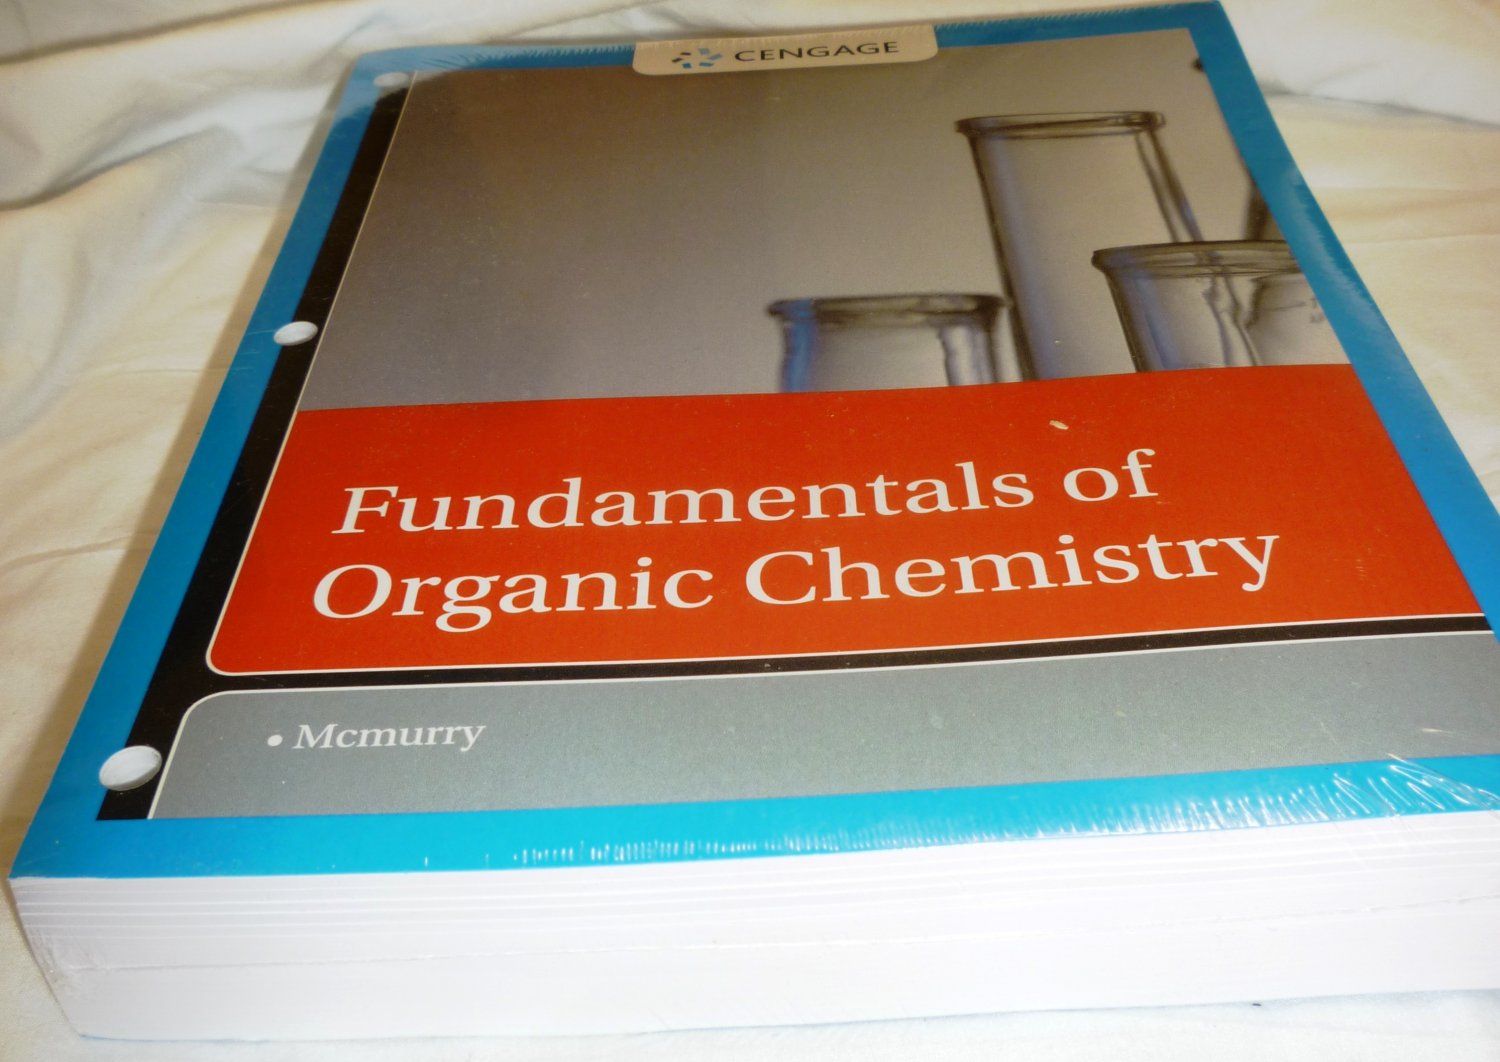 CENGAGE FUNDAMENTALS OF ORGANIC CHEMISTRY BY MCMURRY